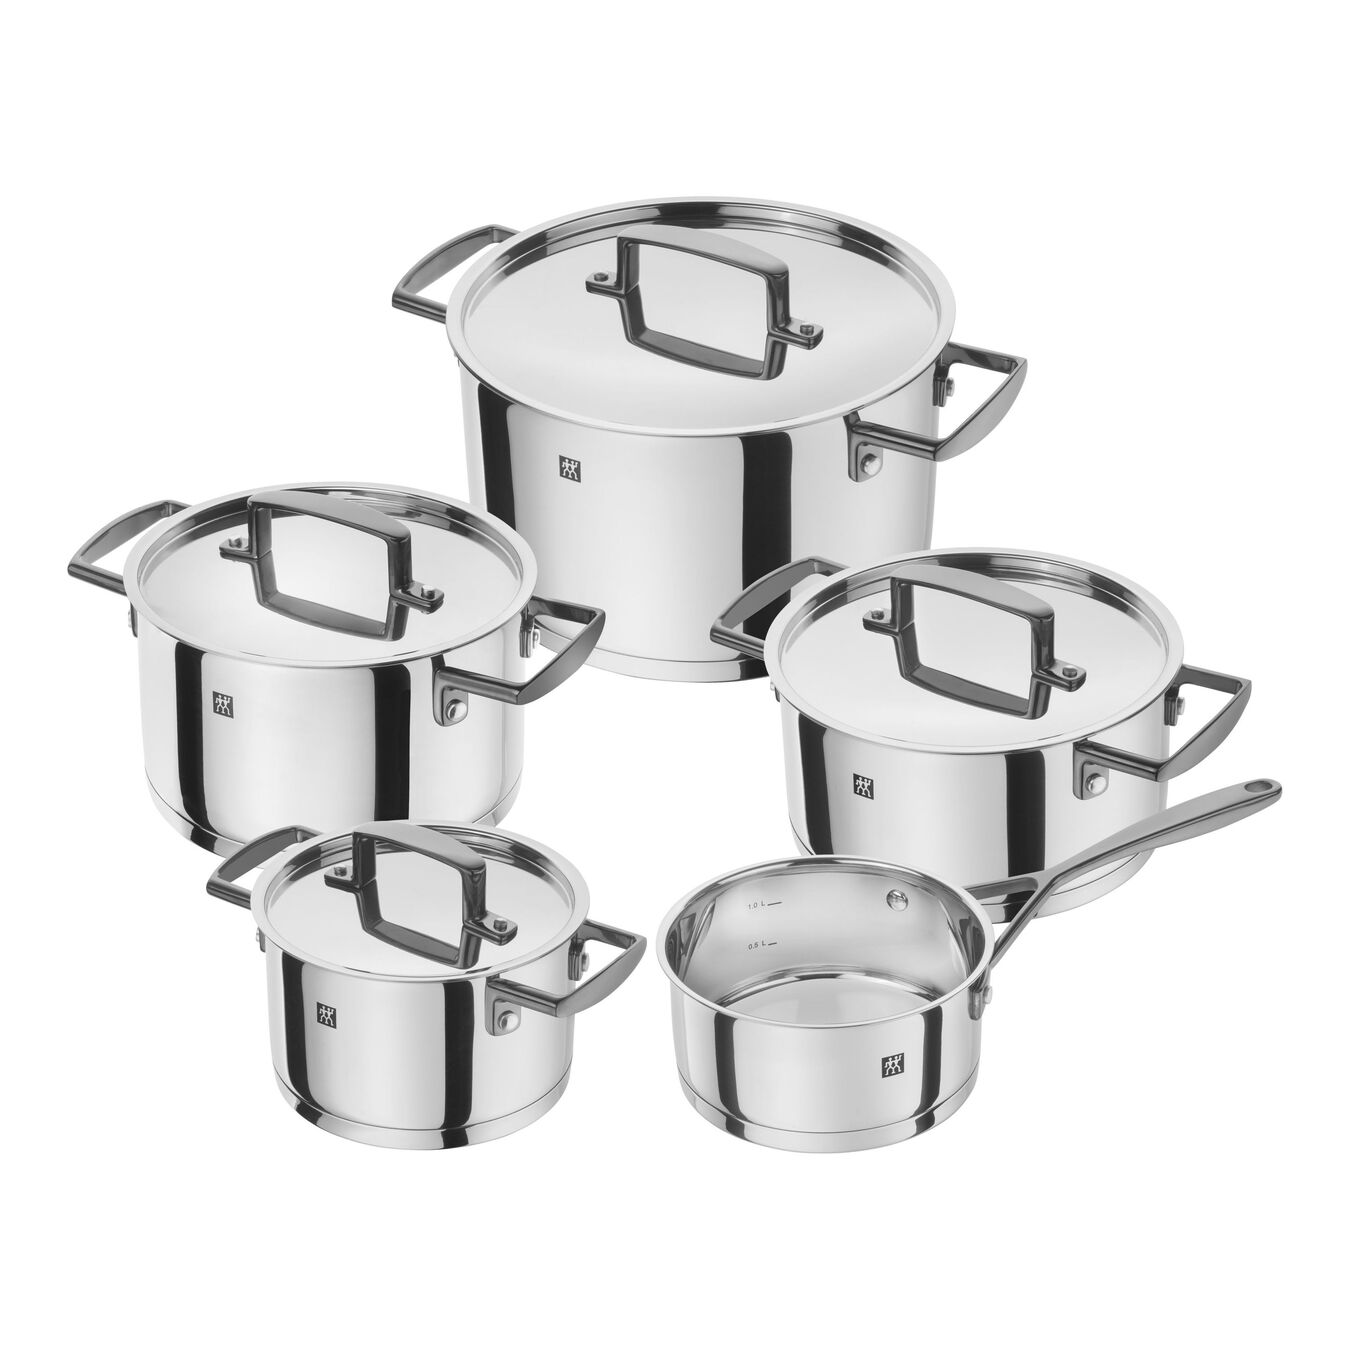 5 Piece 18/10 Stainless Steel Cookware set,,large 1